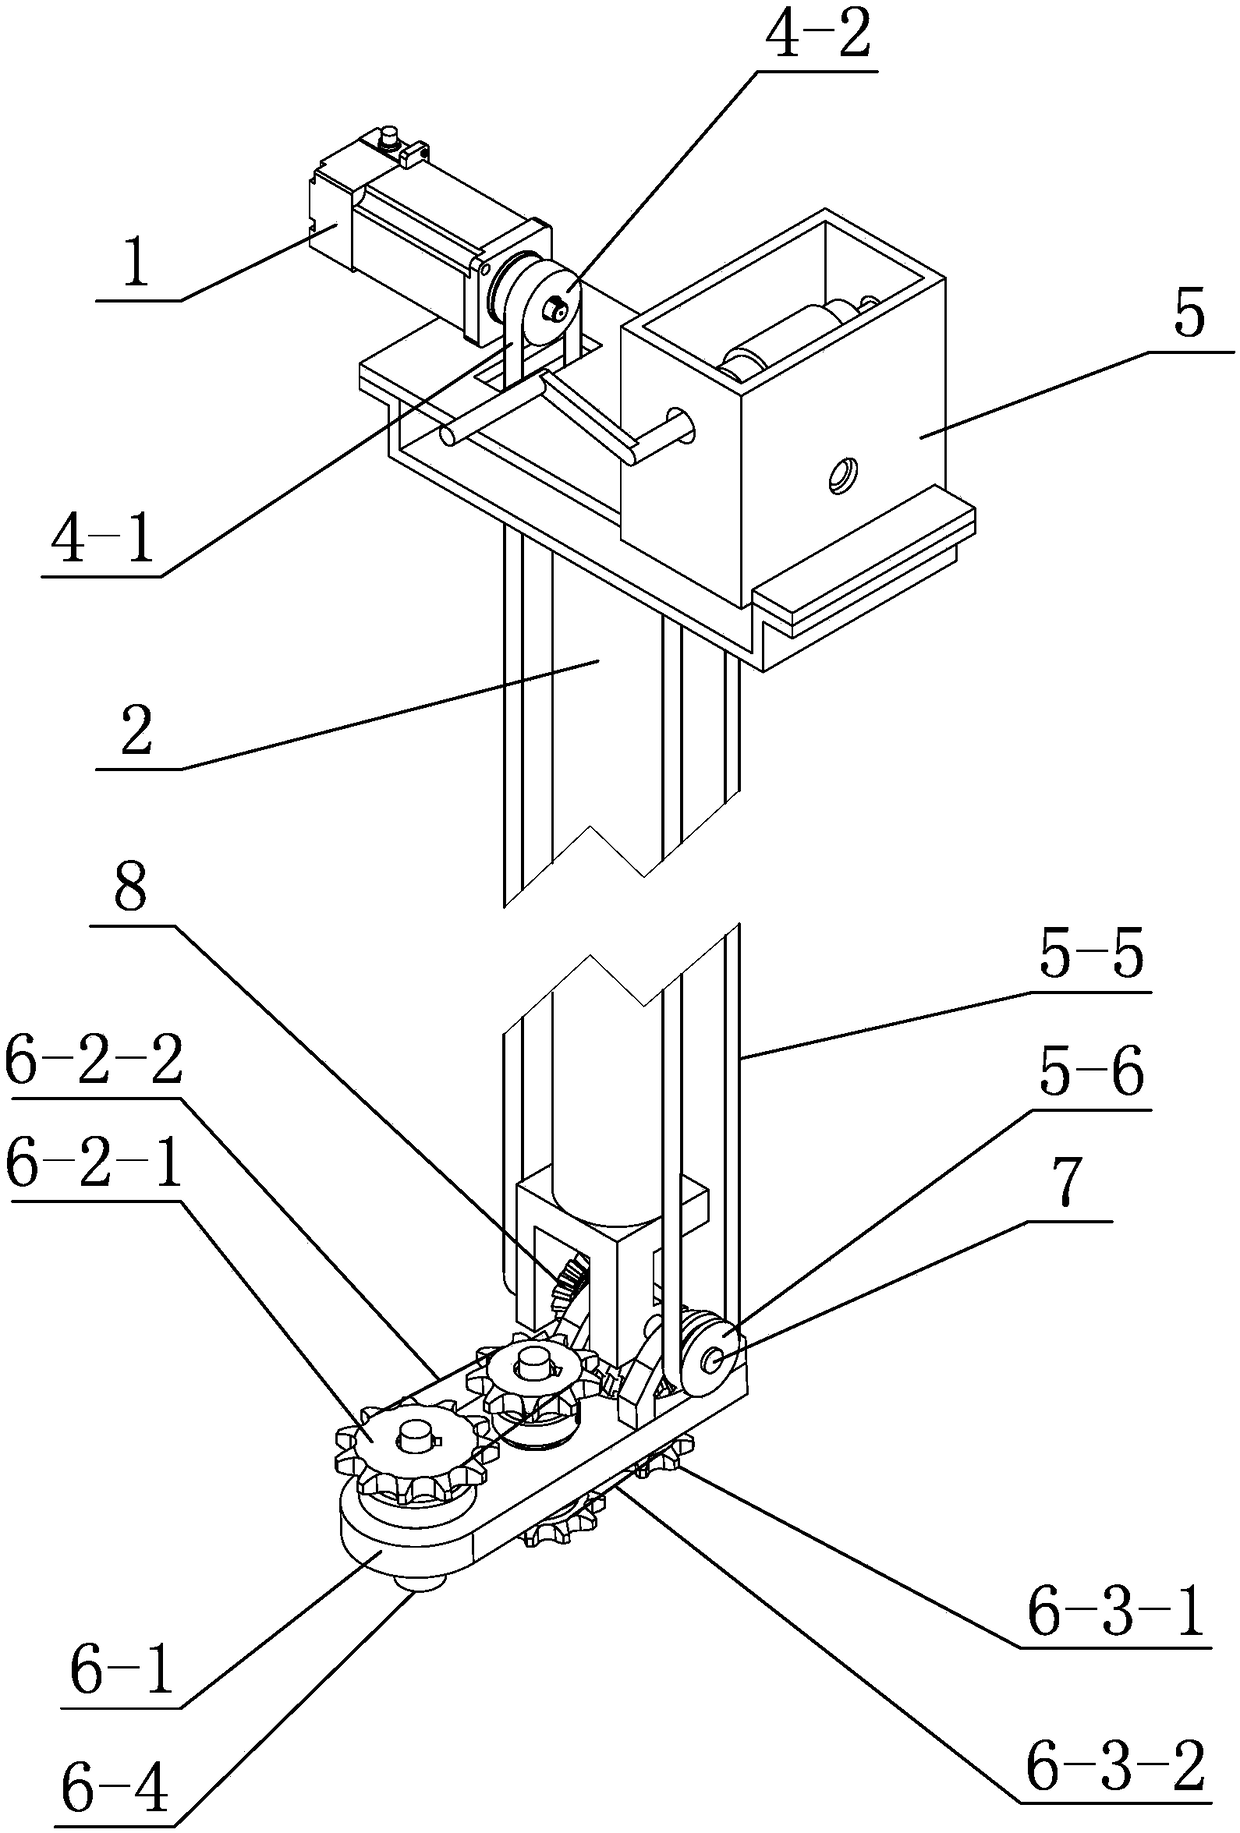 A mechanical arm tooling mechanism for nut assembly in a narrow space